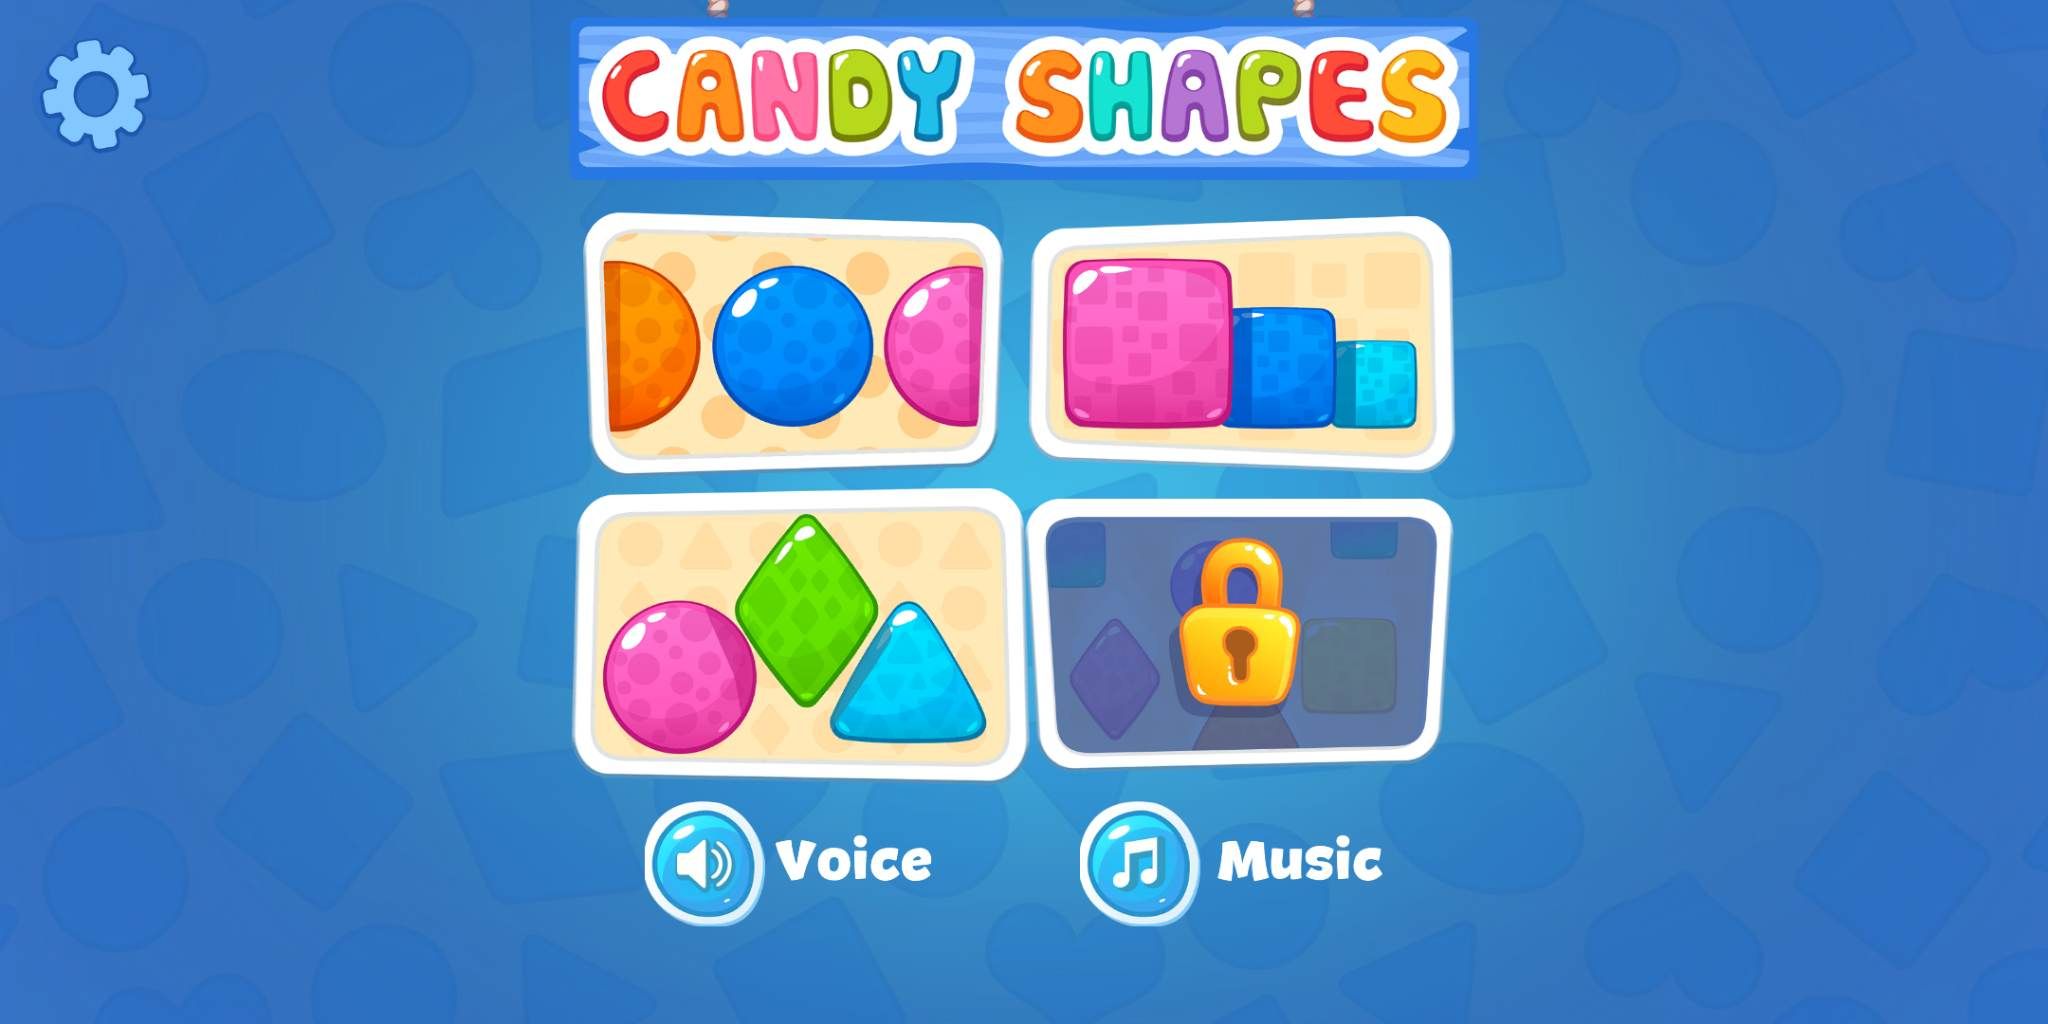 Shapes and colors kids games app selection screen